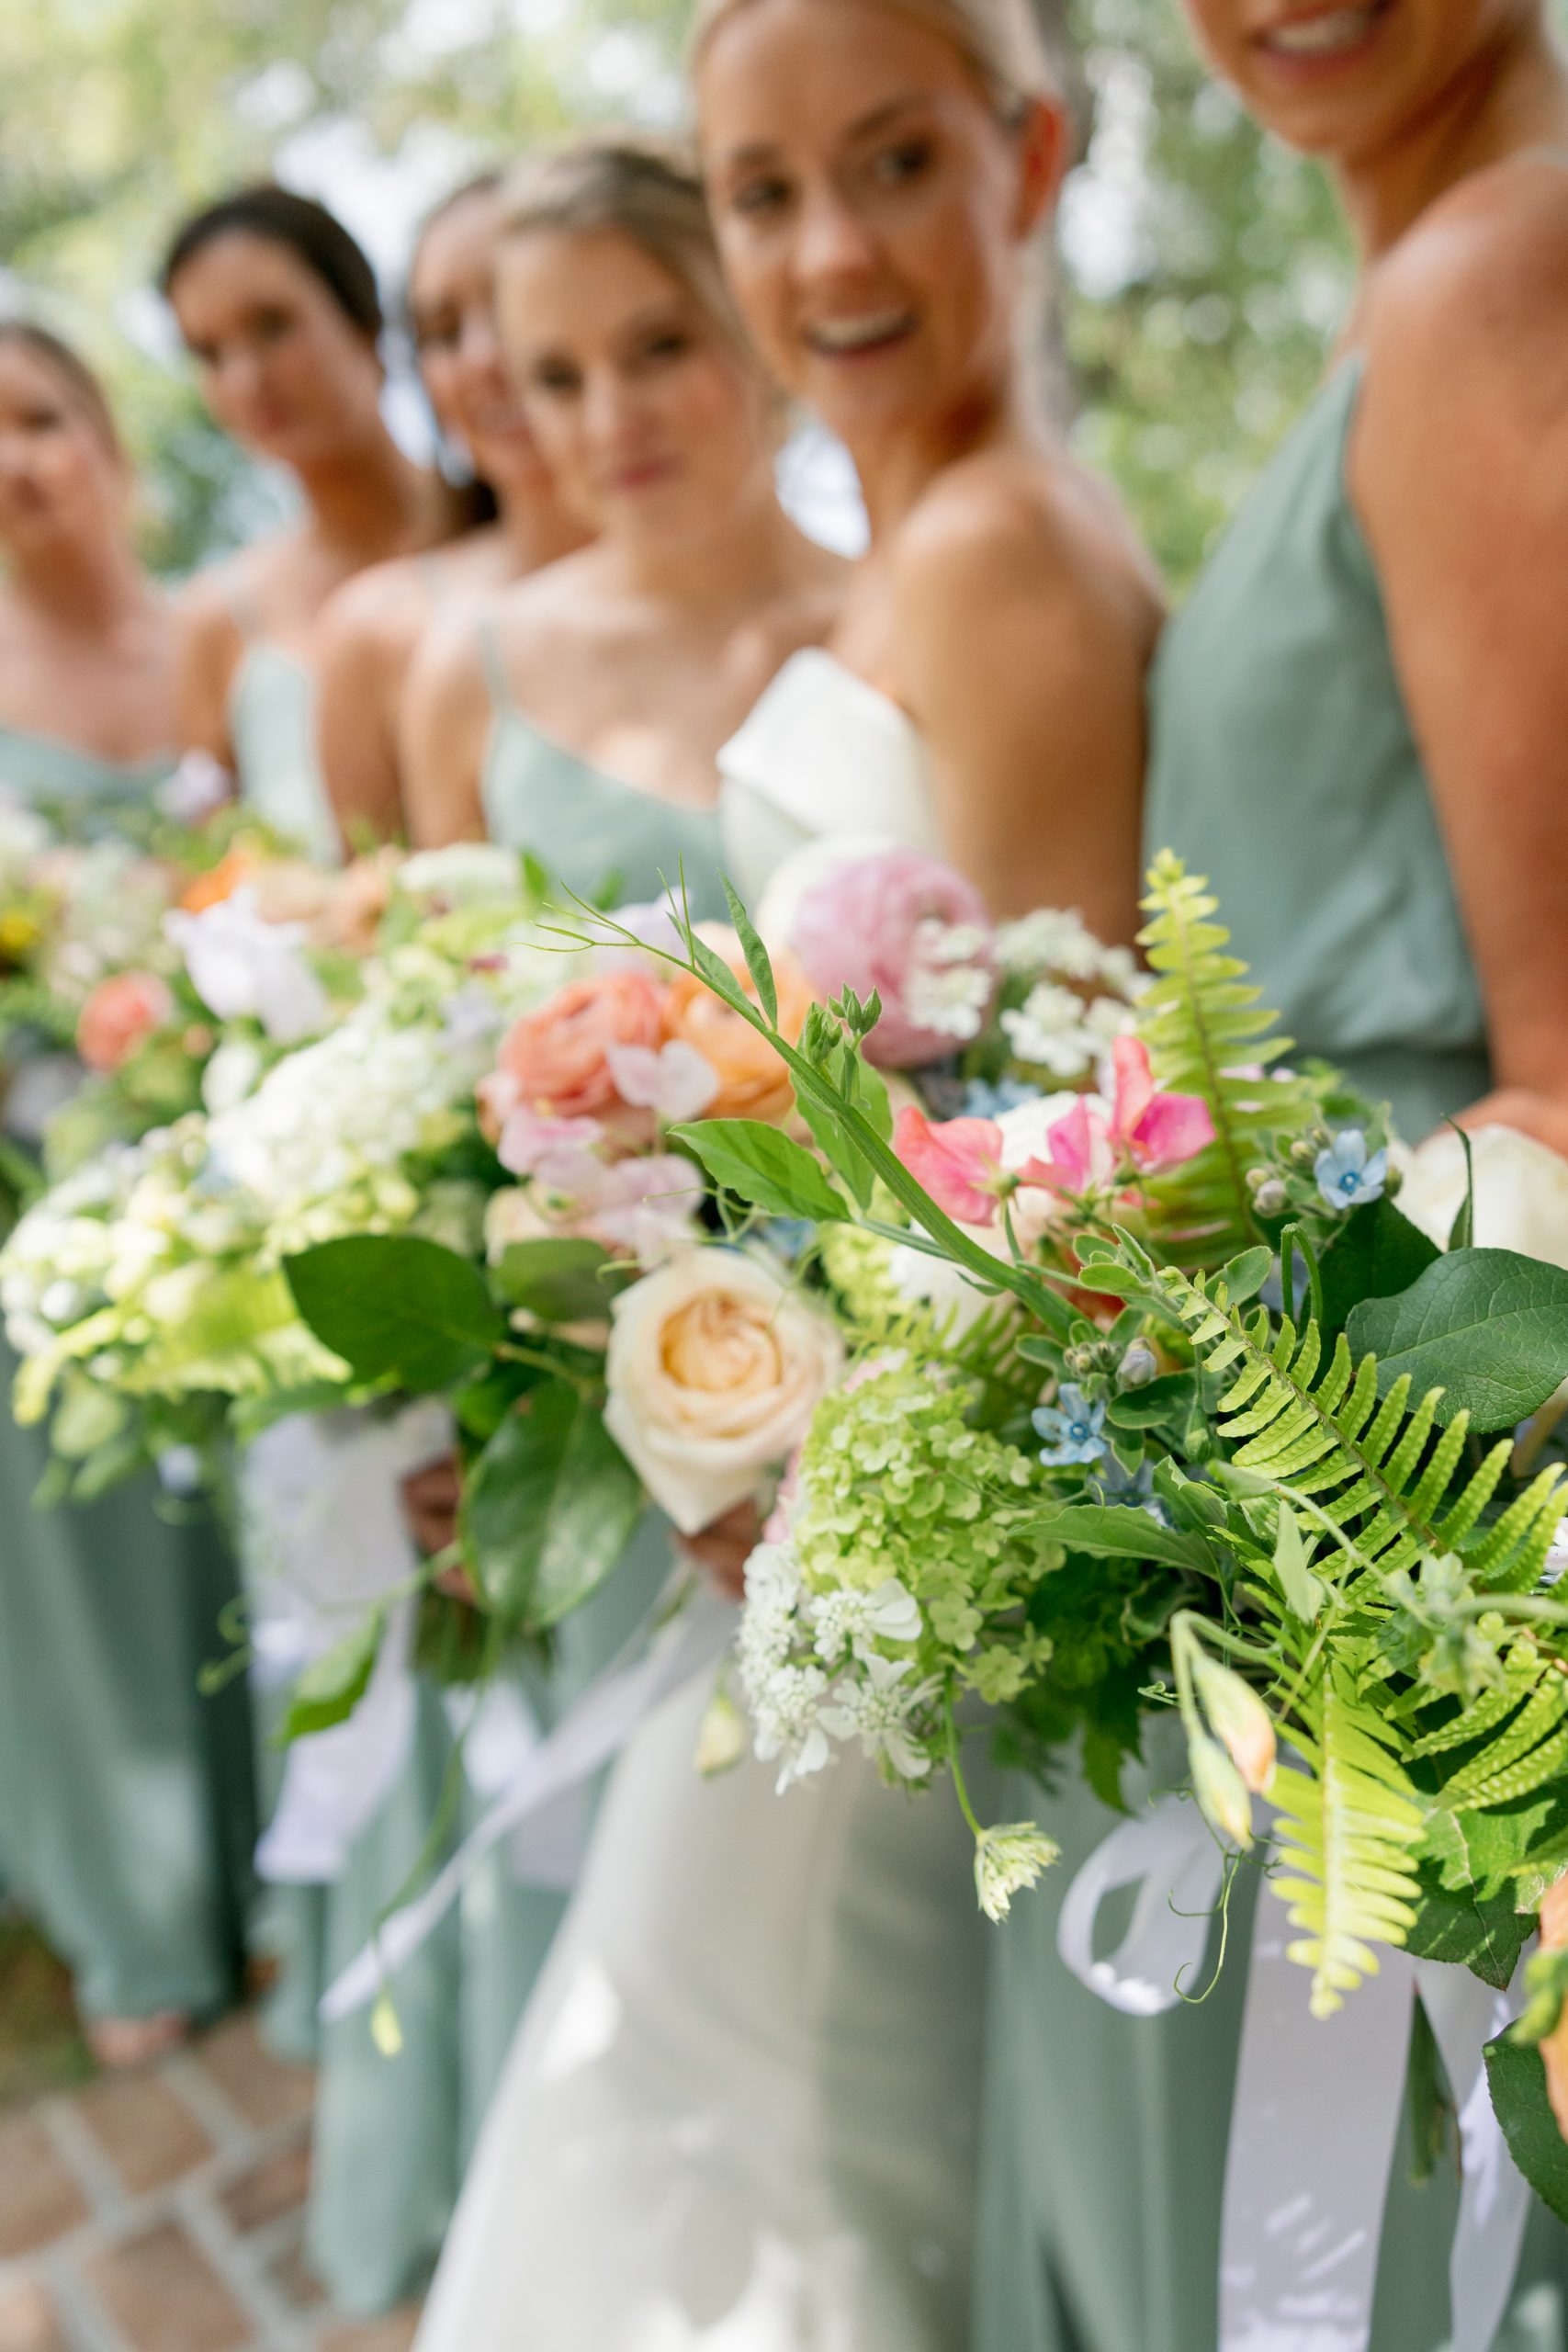 Blake’s bridesmaids, with makeup by POUT and hair by Process, wore identical dresses and carried spring flowers including hydrangeas, sweet pea, poppies, fern, and a soft fuzzy flower called tweedia. Dainty streamers on each bouquet added a whimsical touch. 